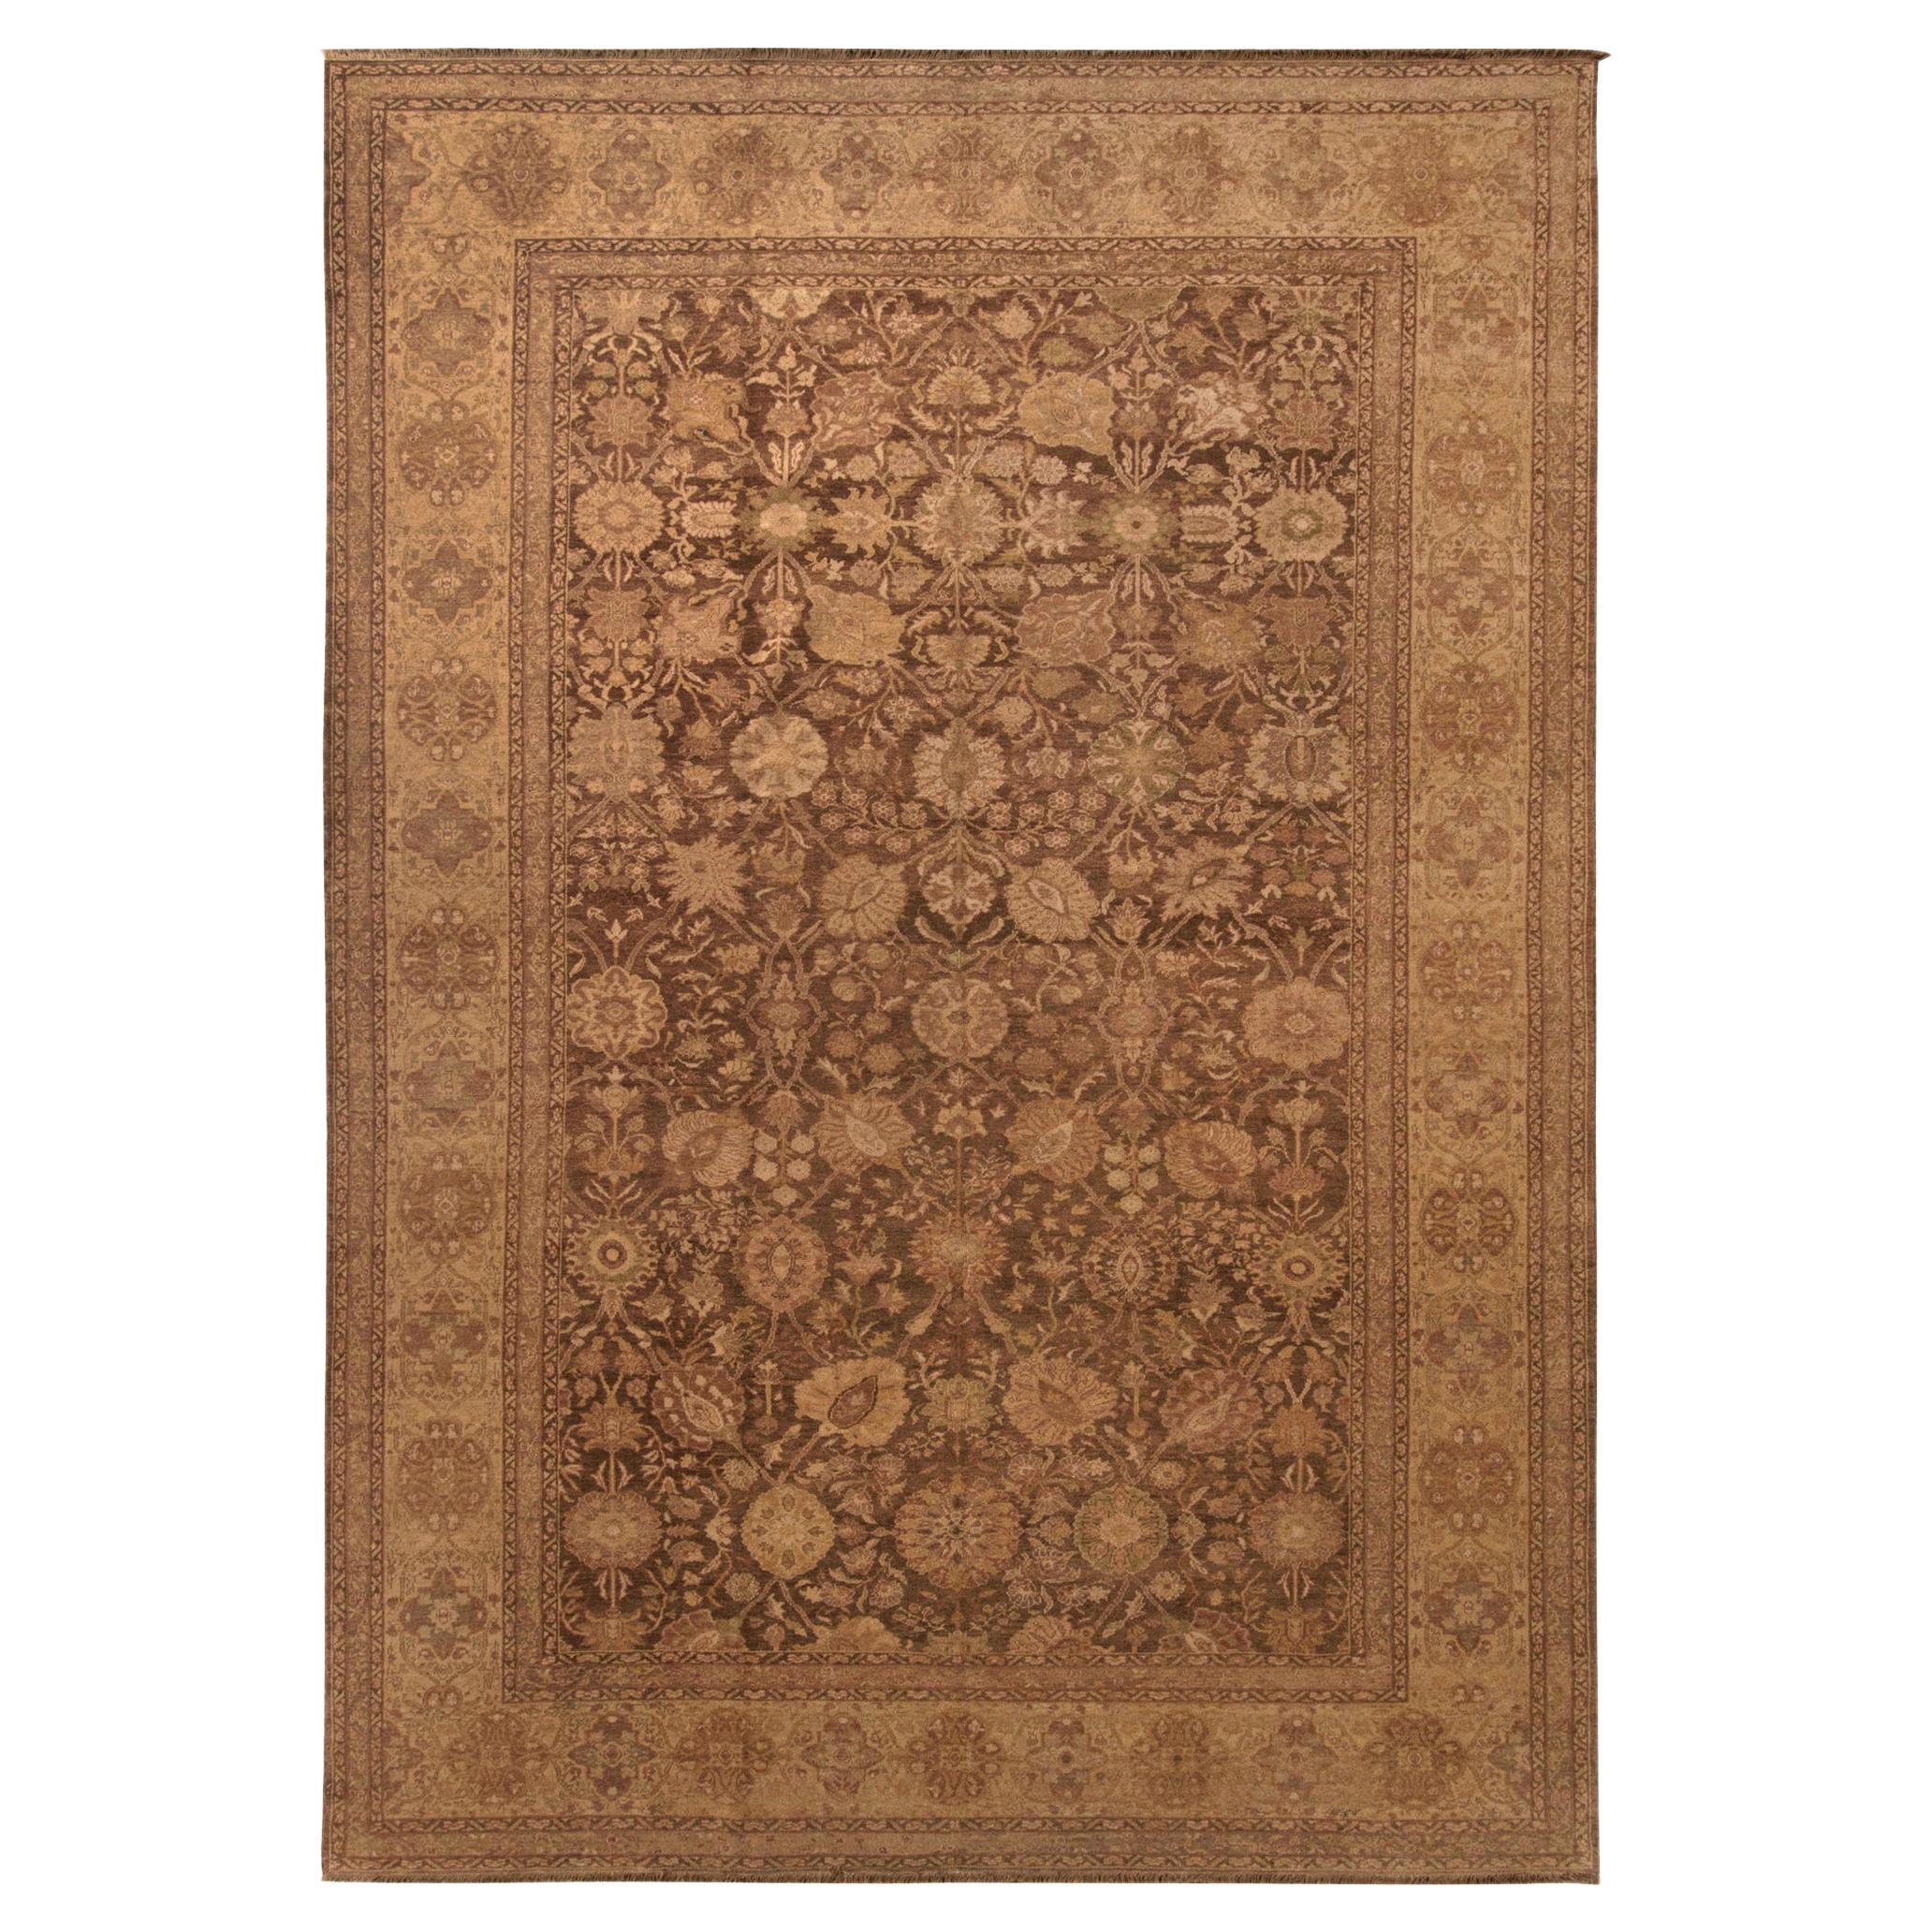 Rug & Kilim's Sultanabad Antique Style Rug in Brown, Golden Floral Pattern For Sale